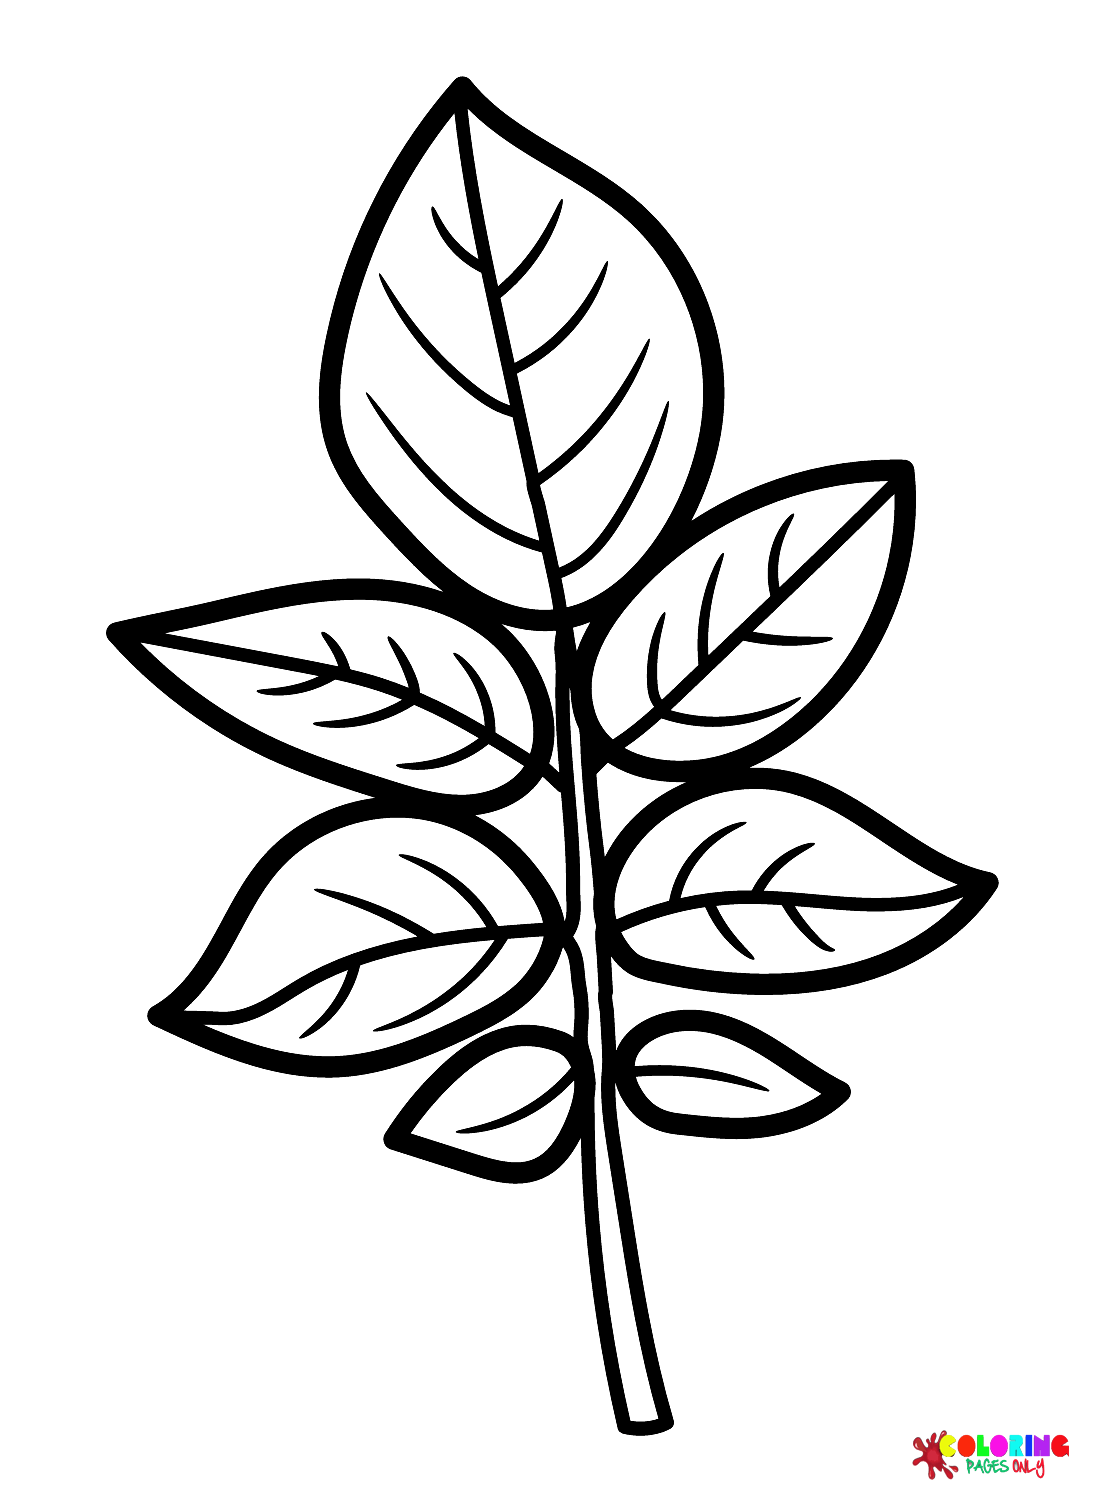 Potato Leaf from Leaves